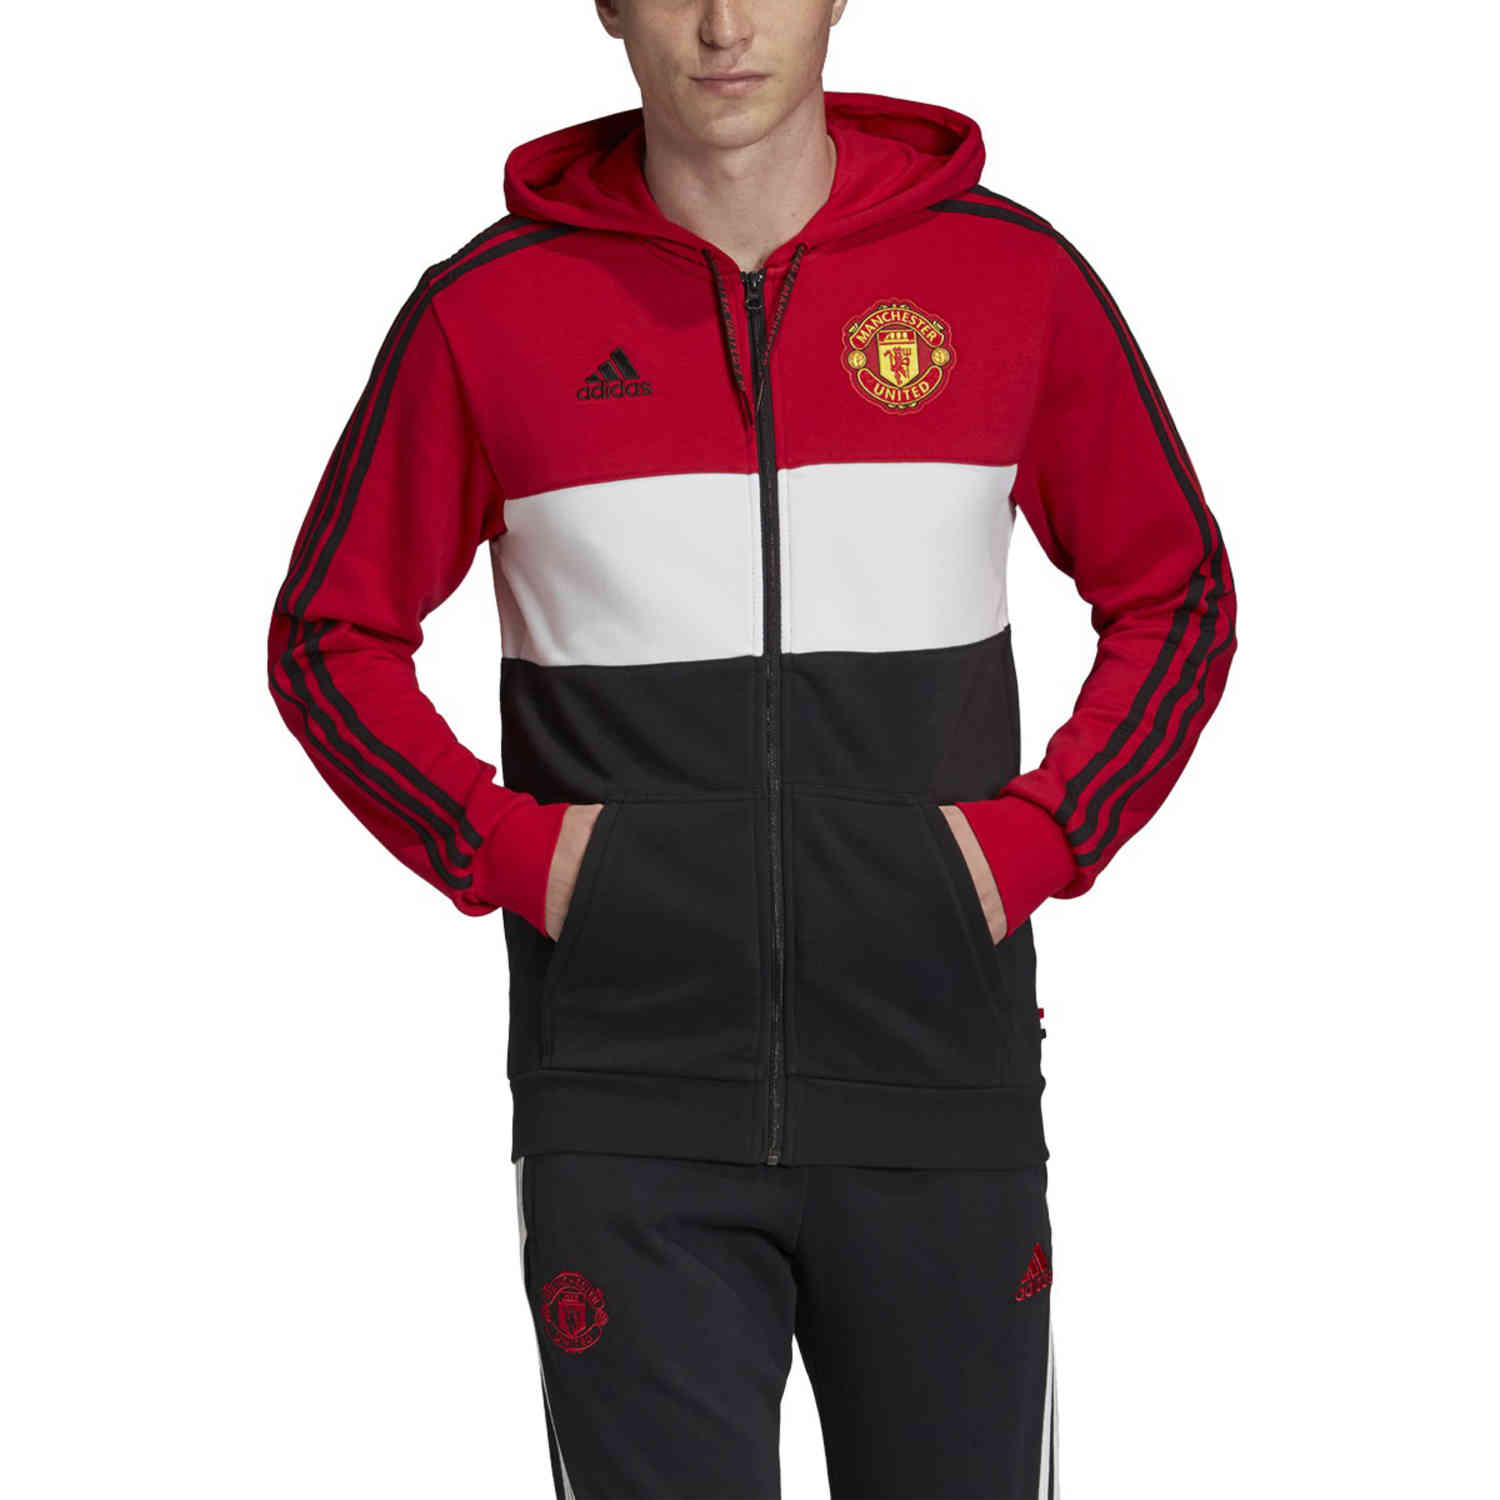 adidas red white and black jacket